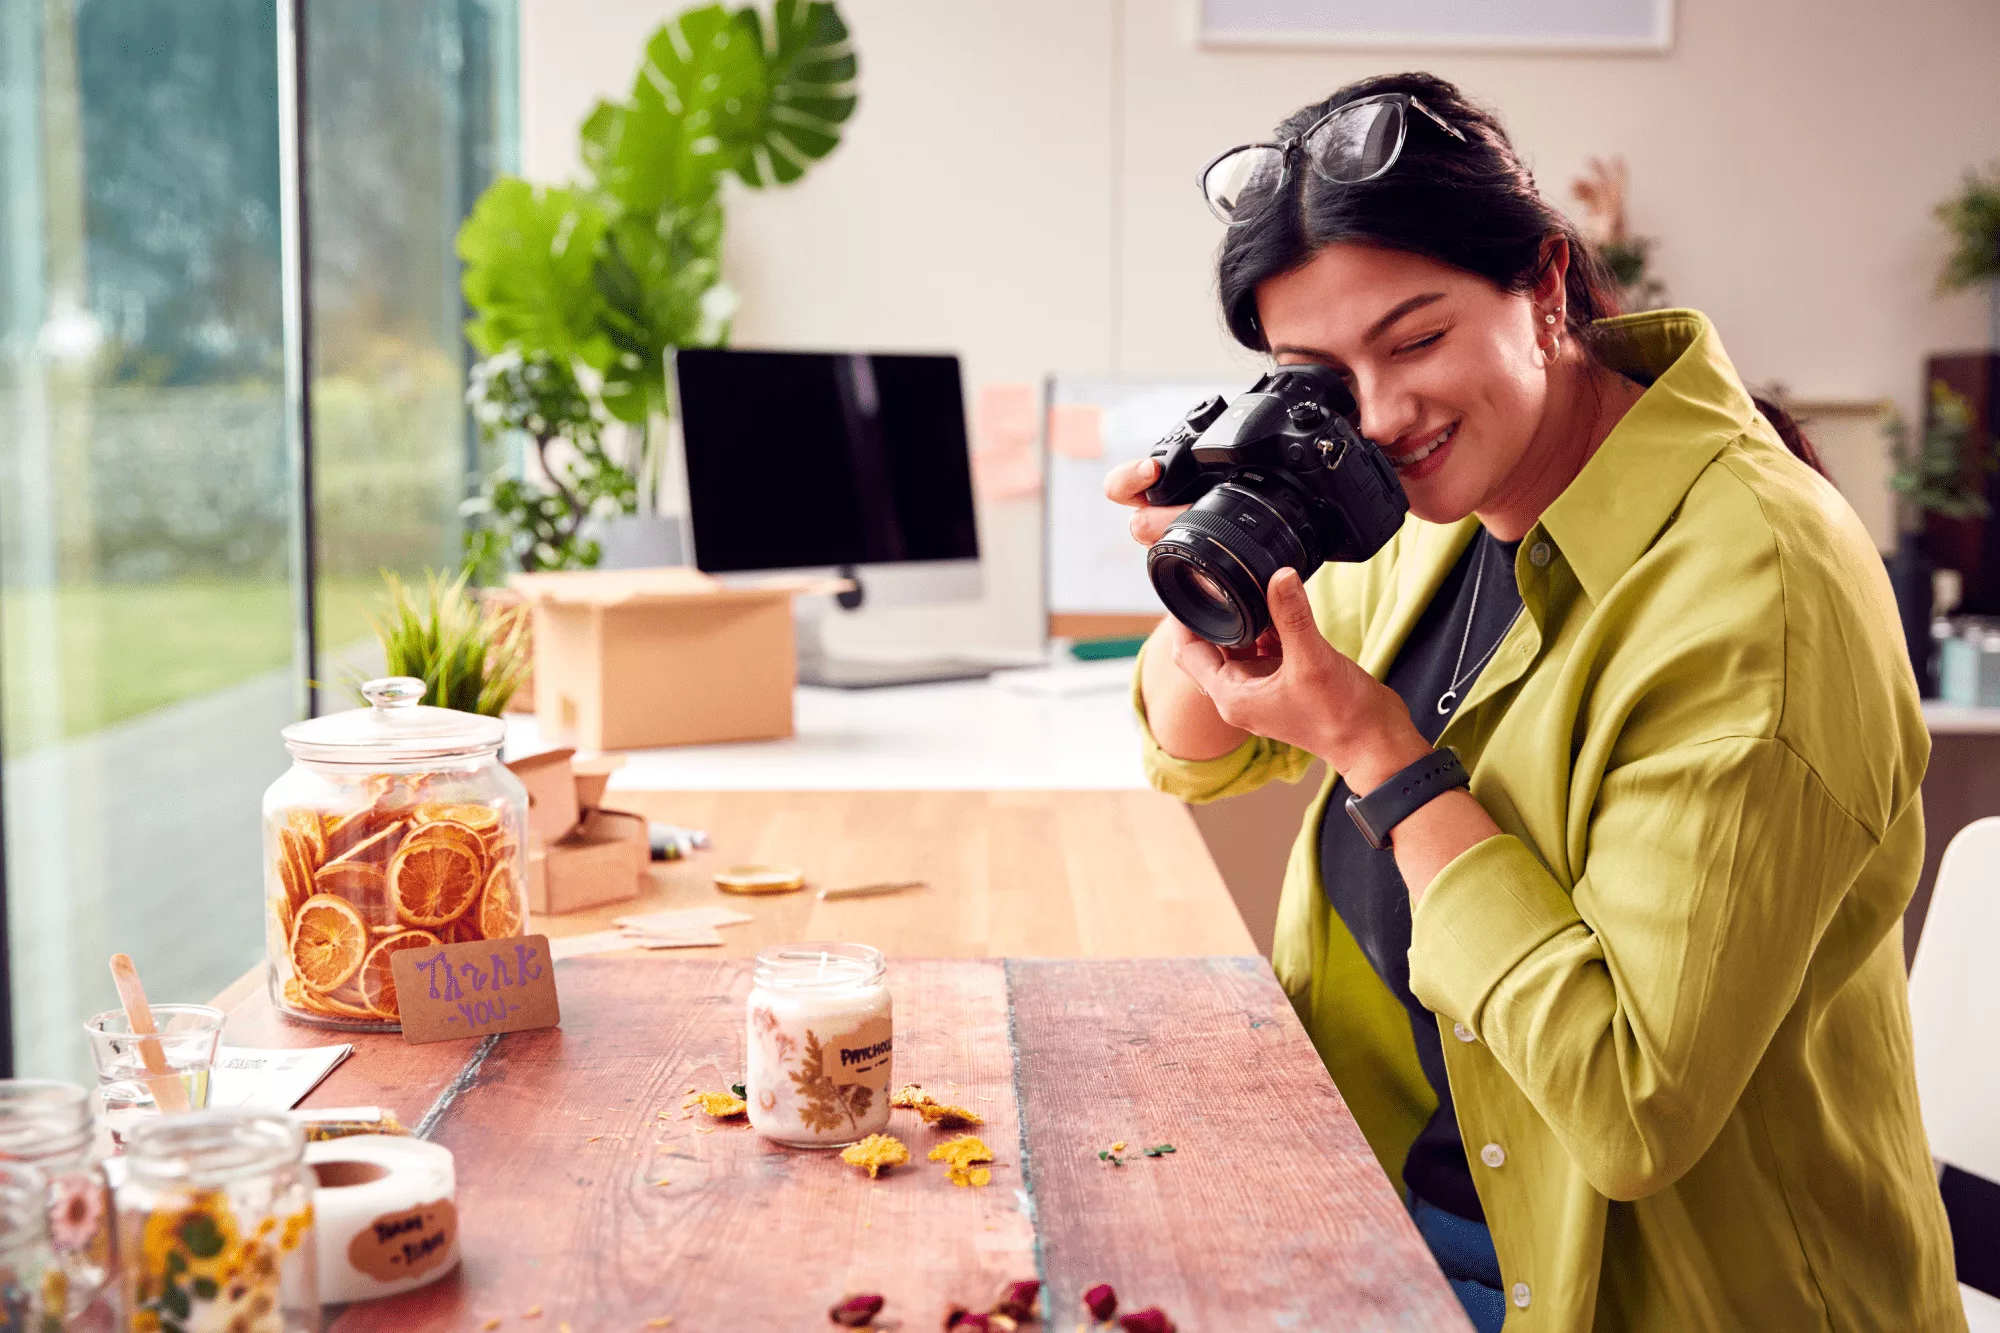 Product Photography Pitfalls: How Subpar Images Can Kill Your Online Sales